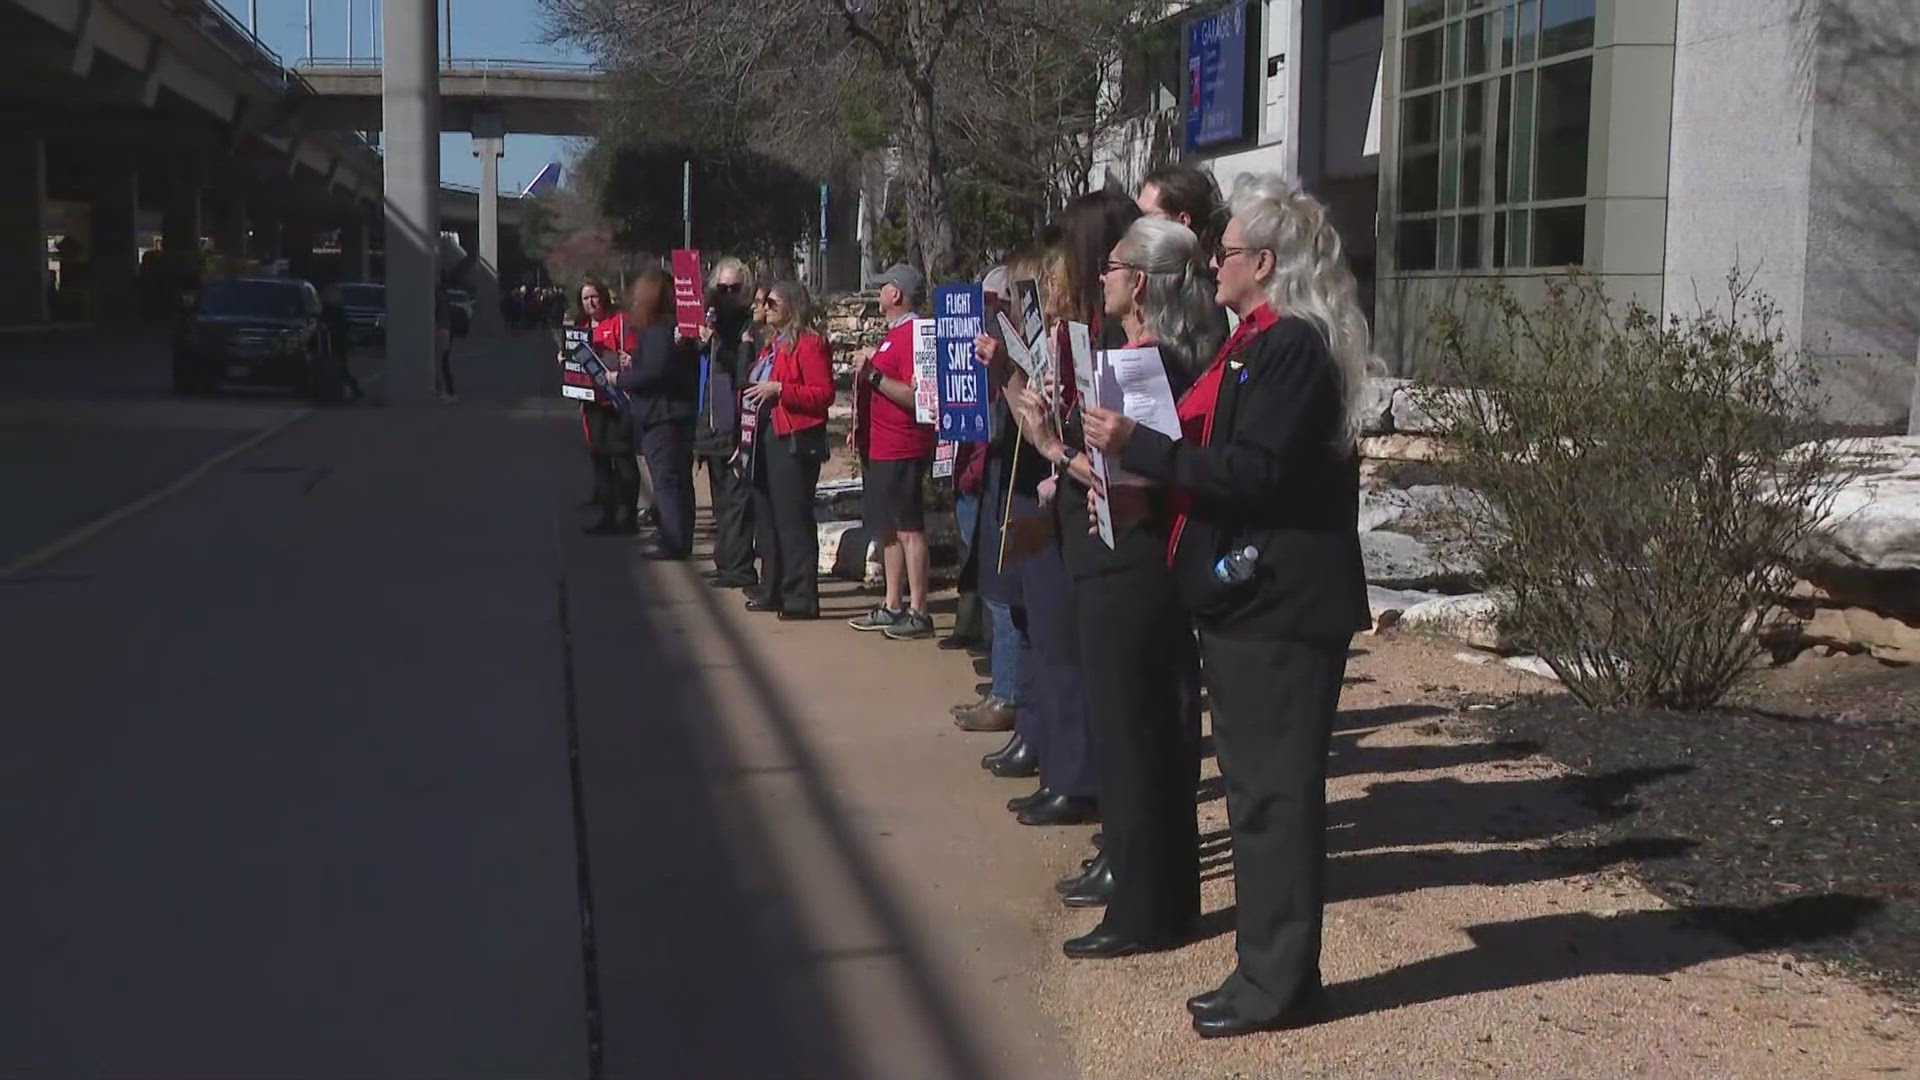 KVUE's Eric Pointer spoke with one of the flight attendants picketing outside the Austin airport Tuesday morning.